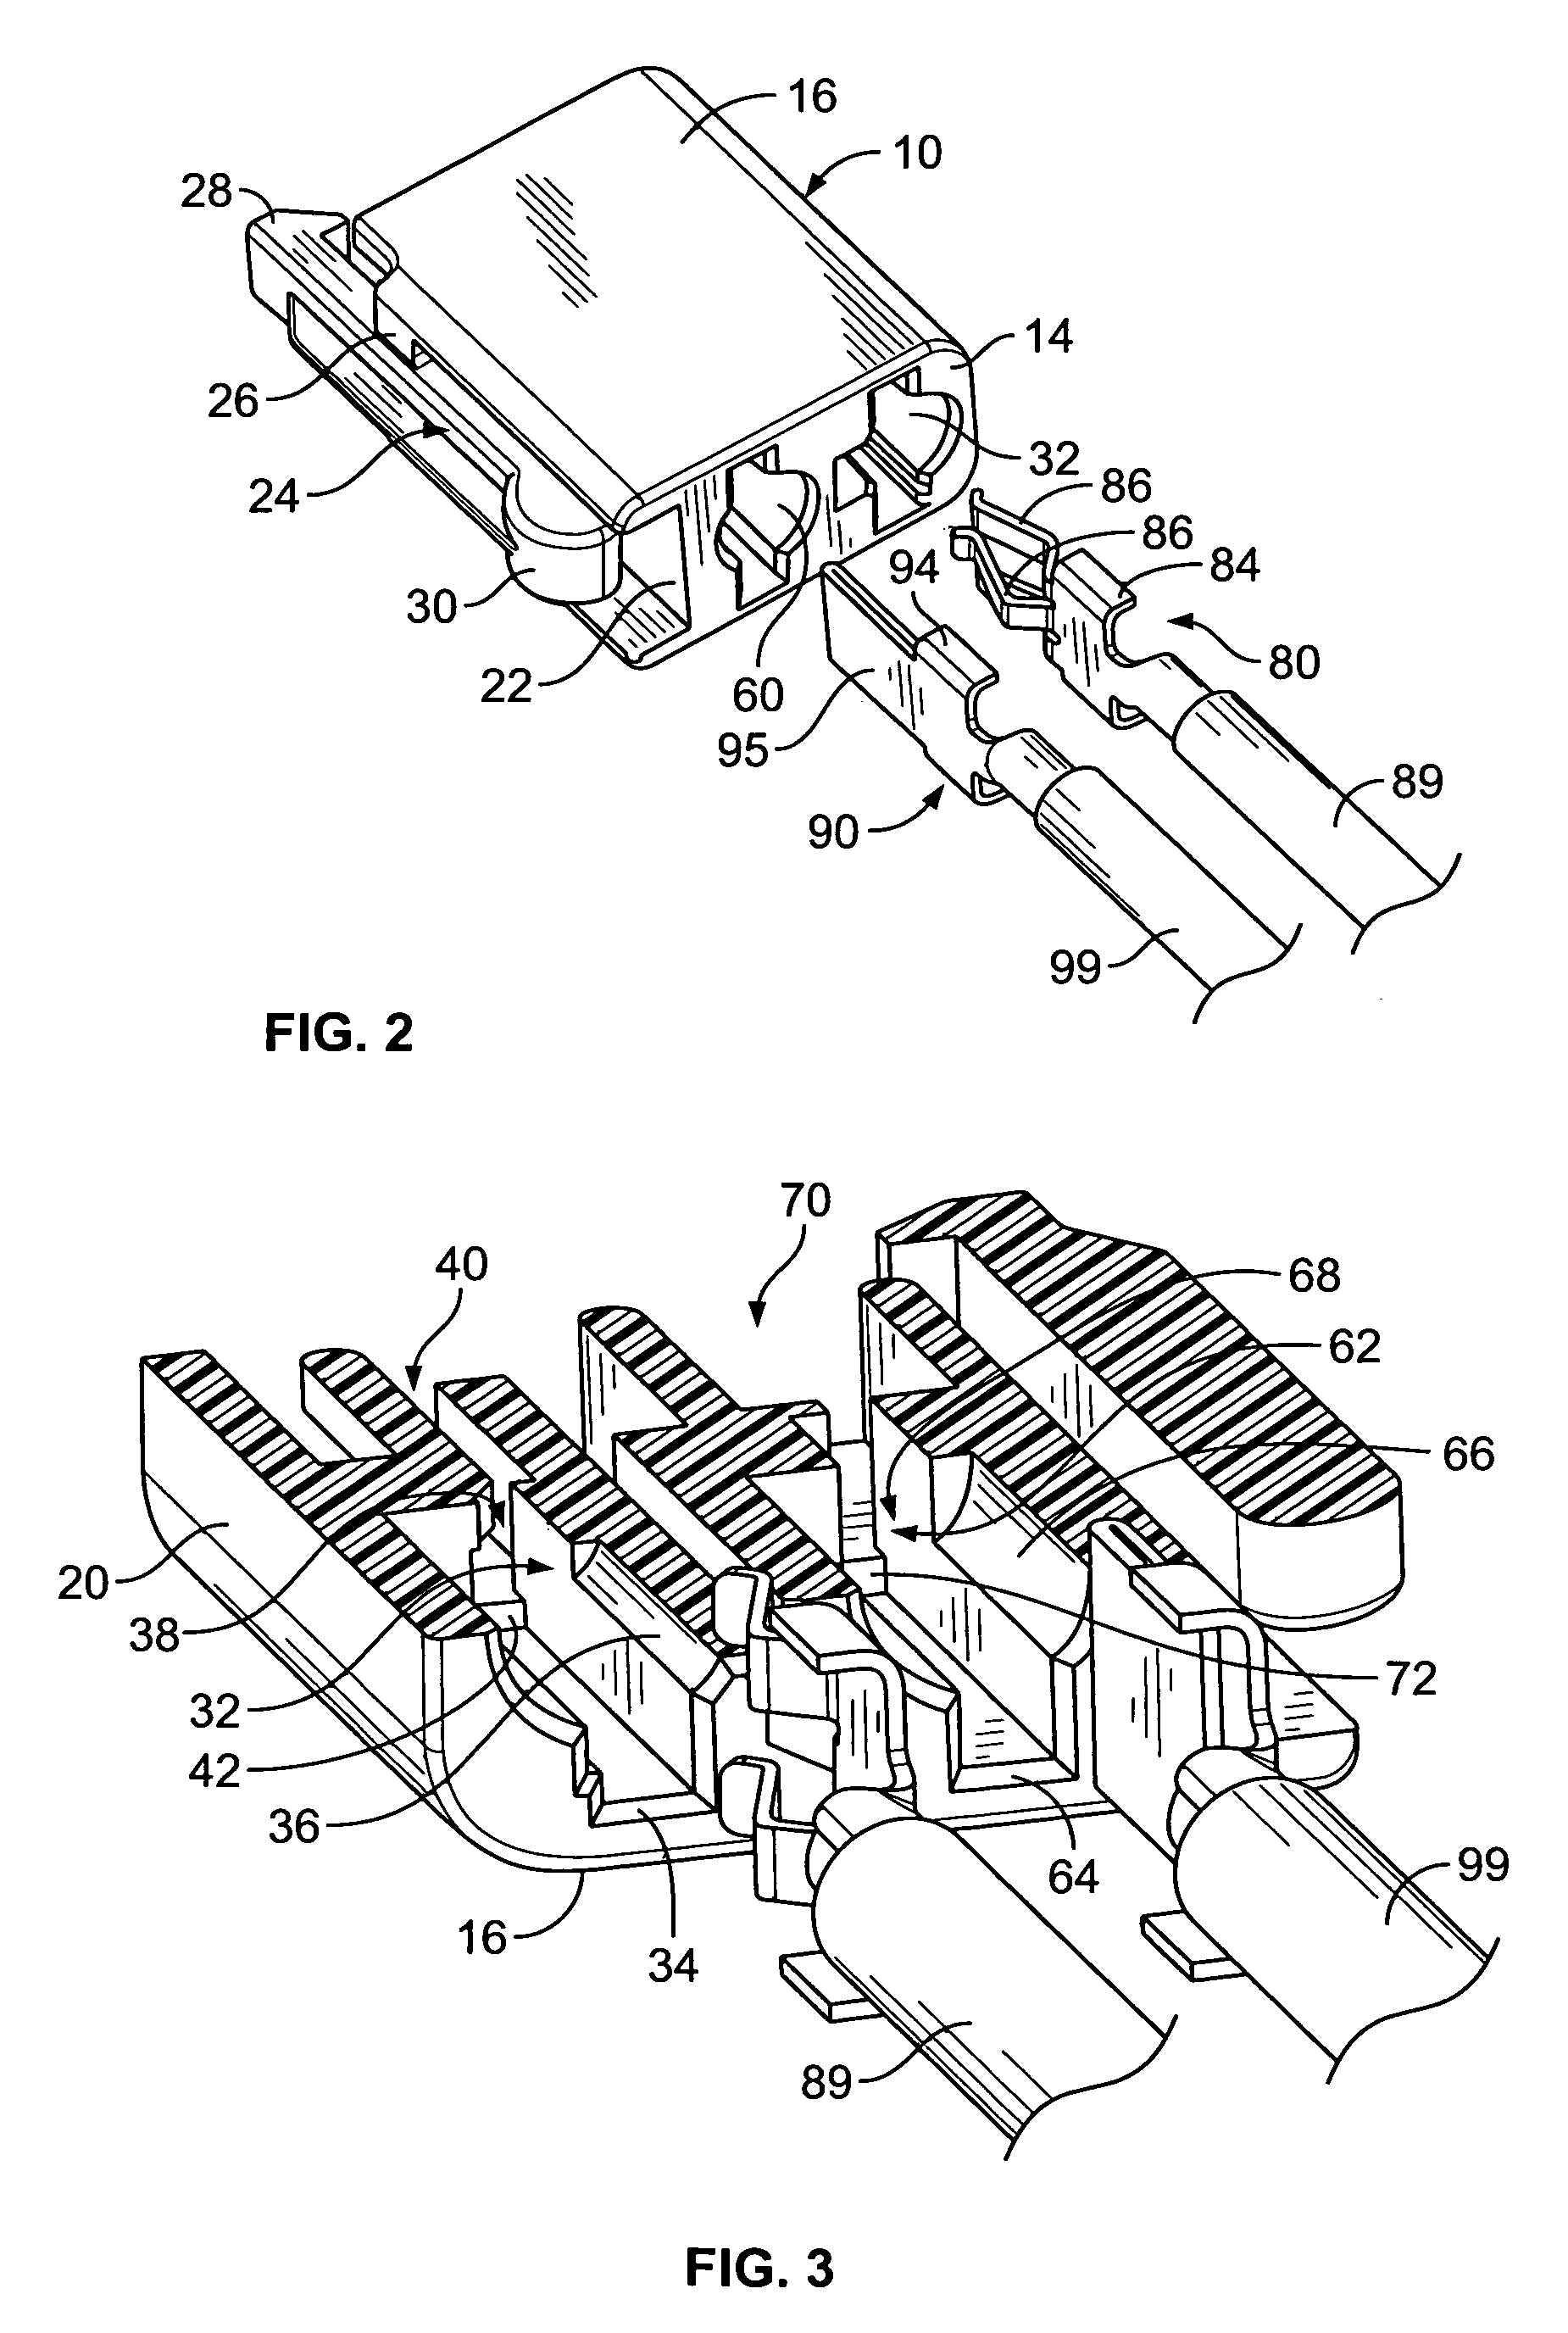 Blade and receptacle power connector